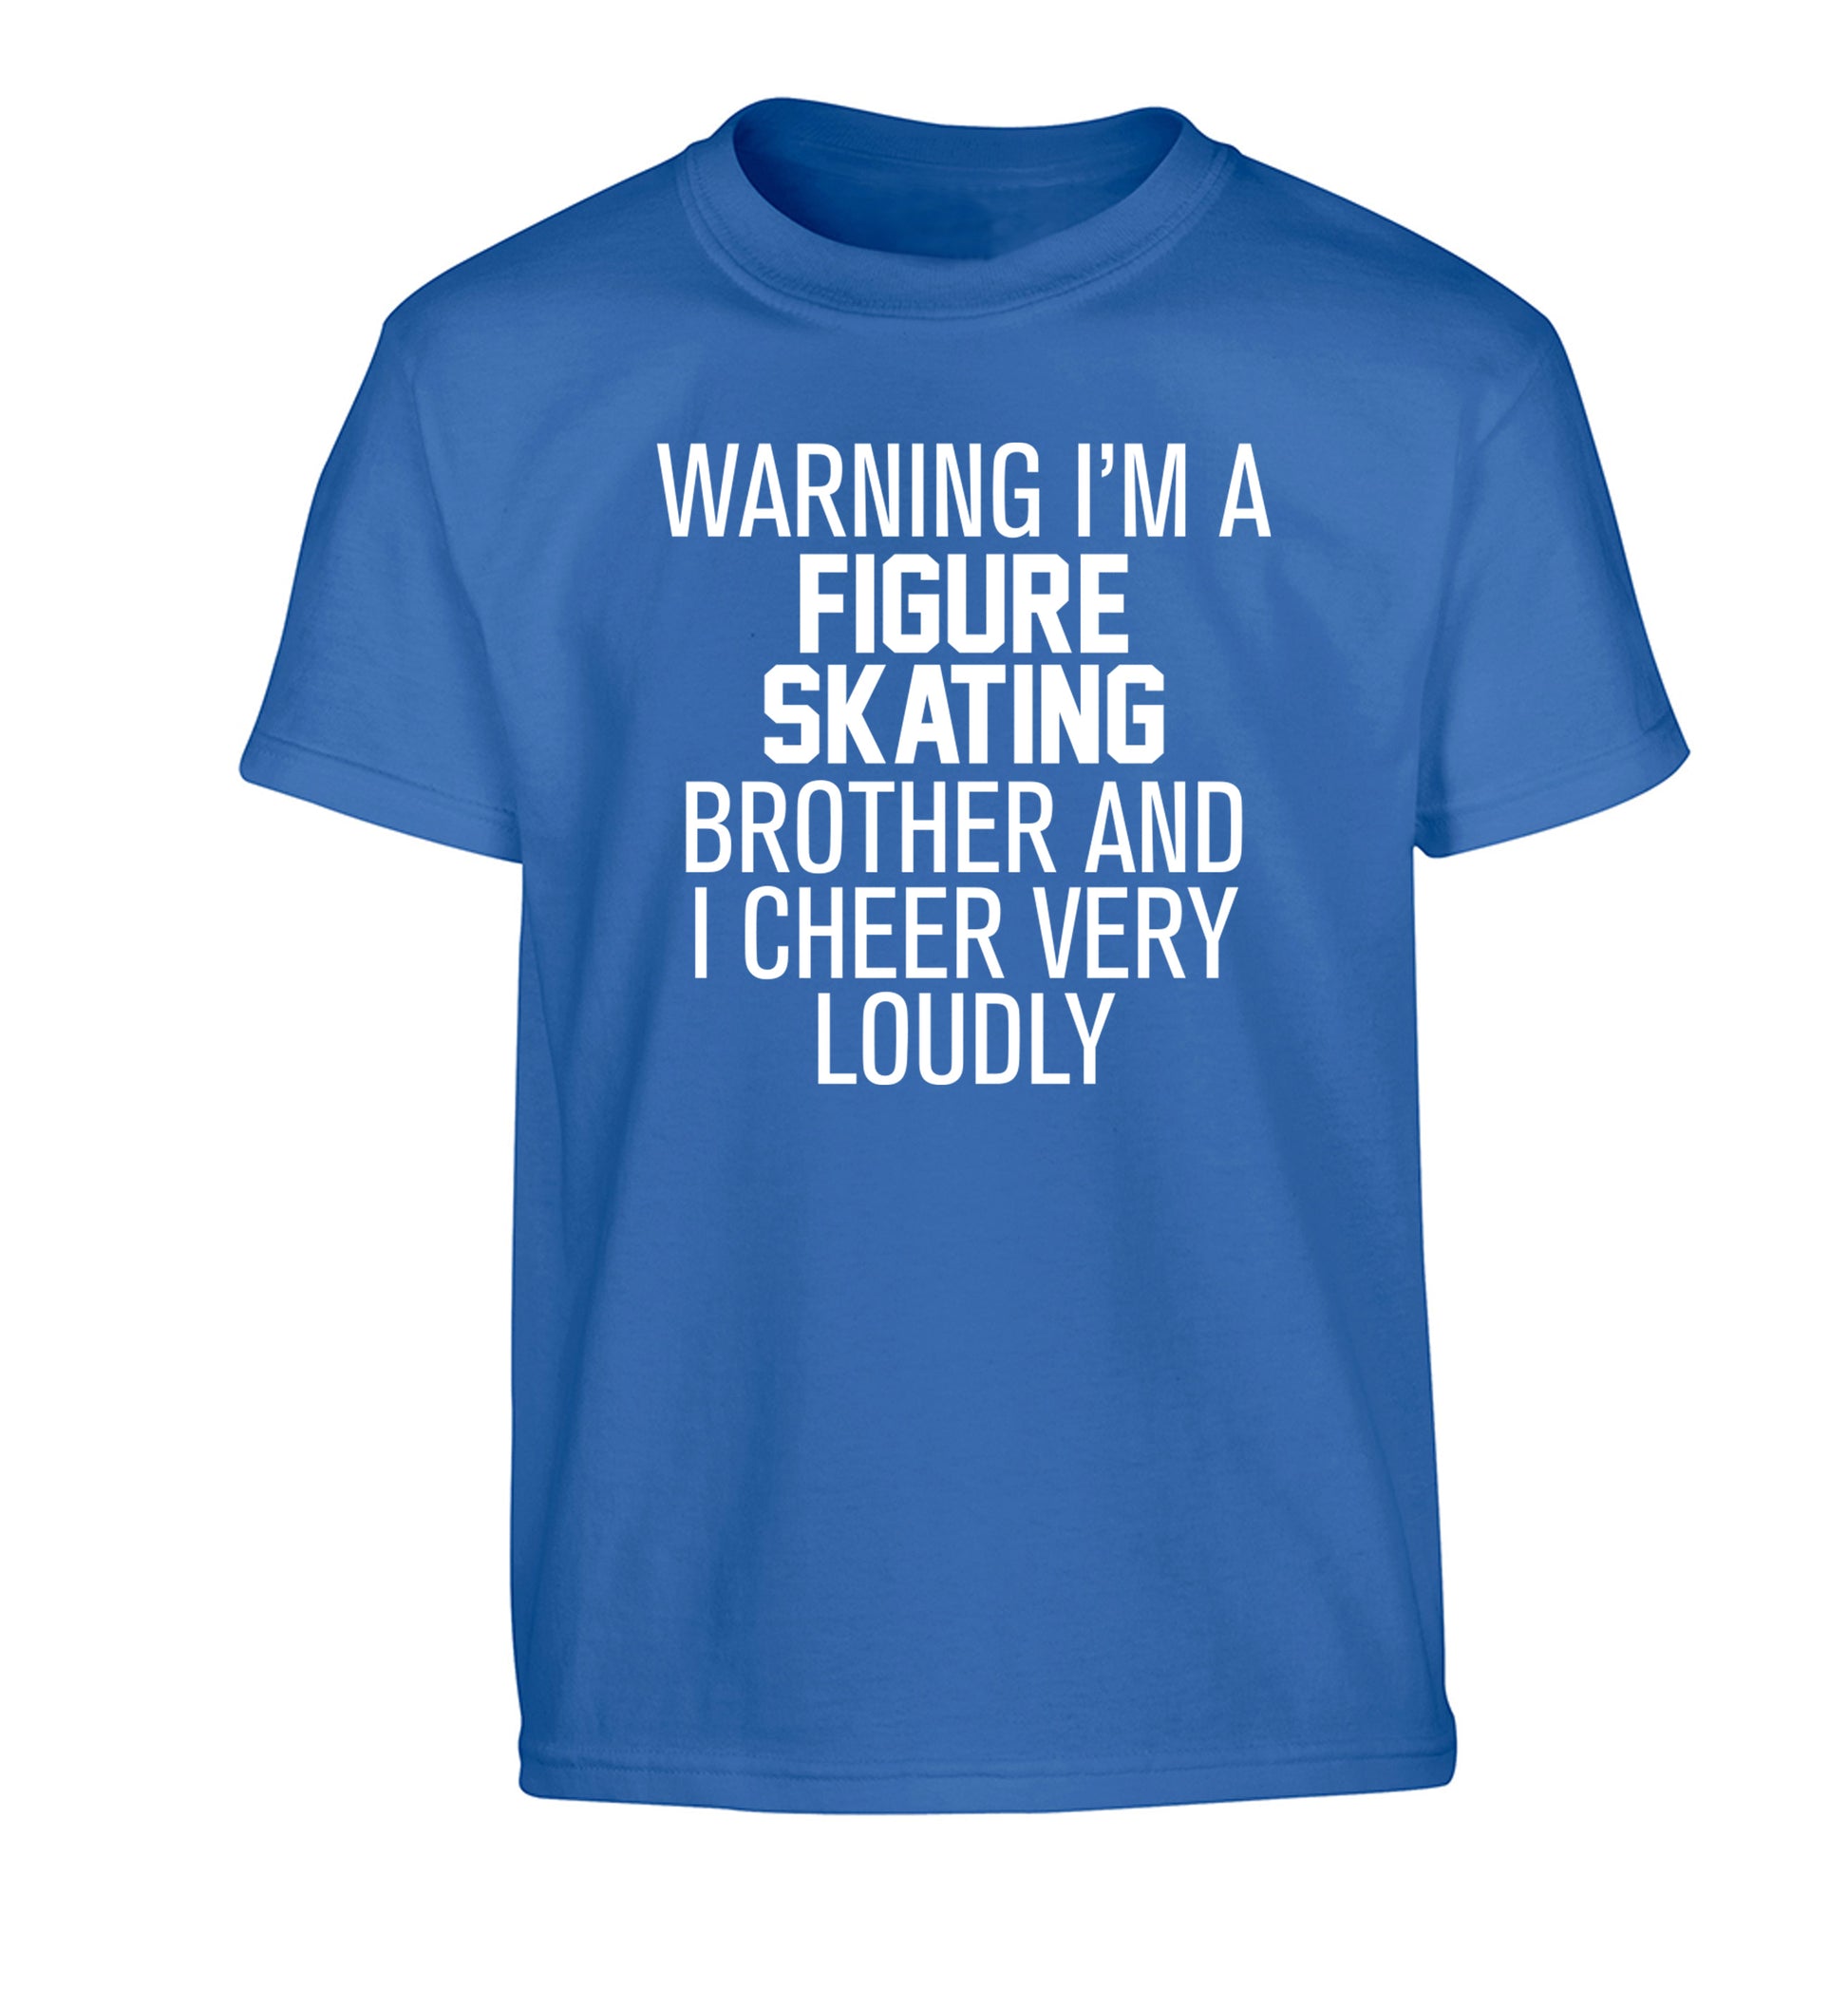 Warning I'm a figure skating brother and I cheer very loudly Children's blue Tshirt 12-14 Years